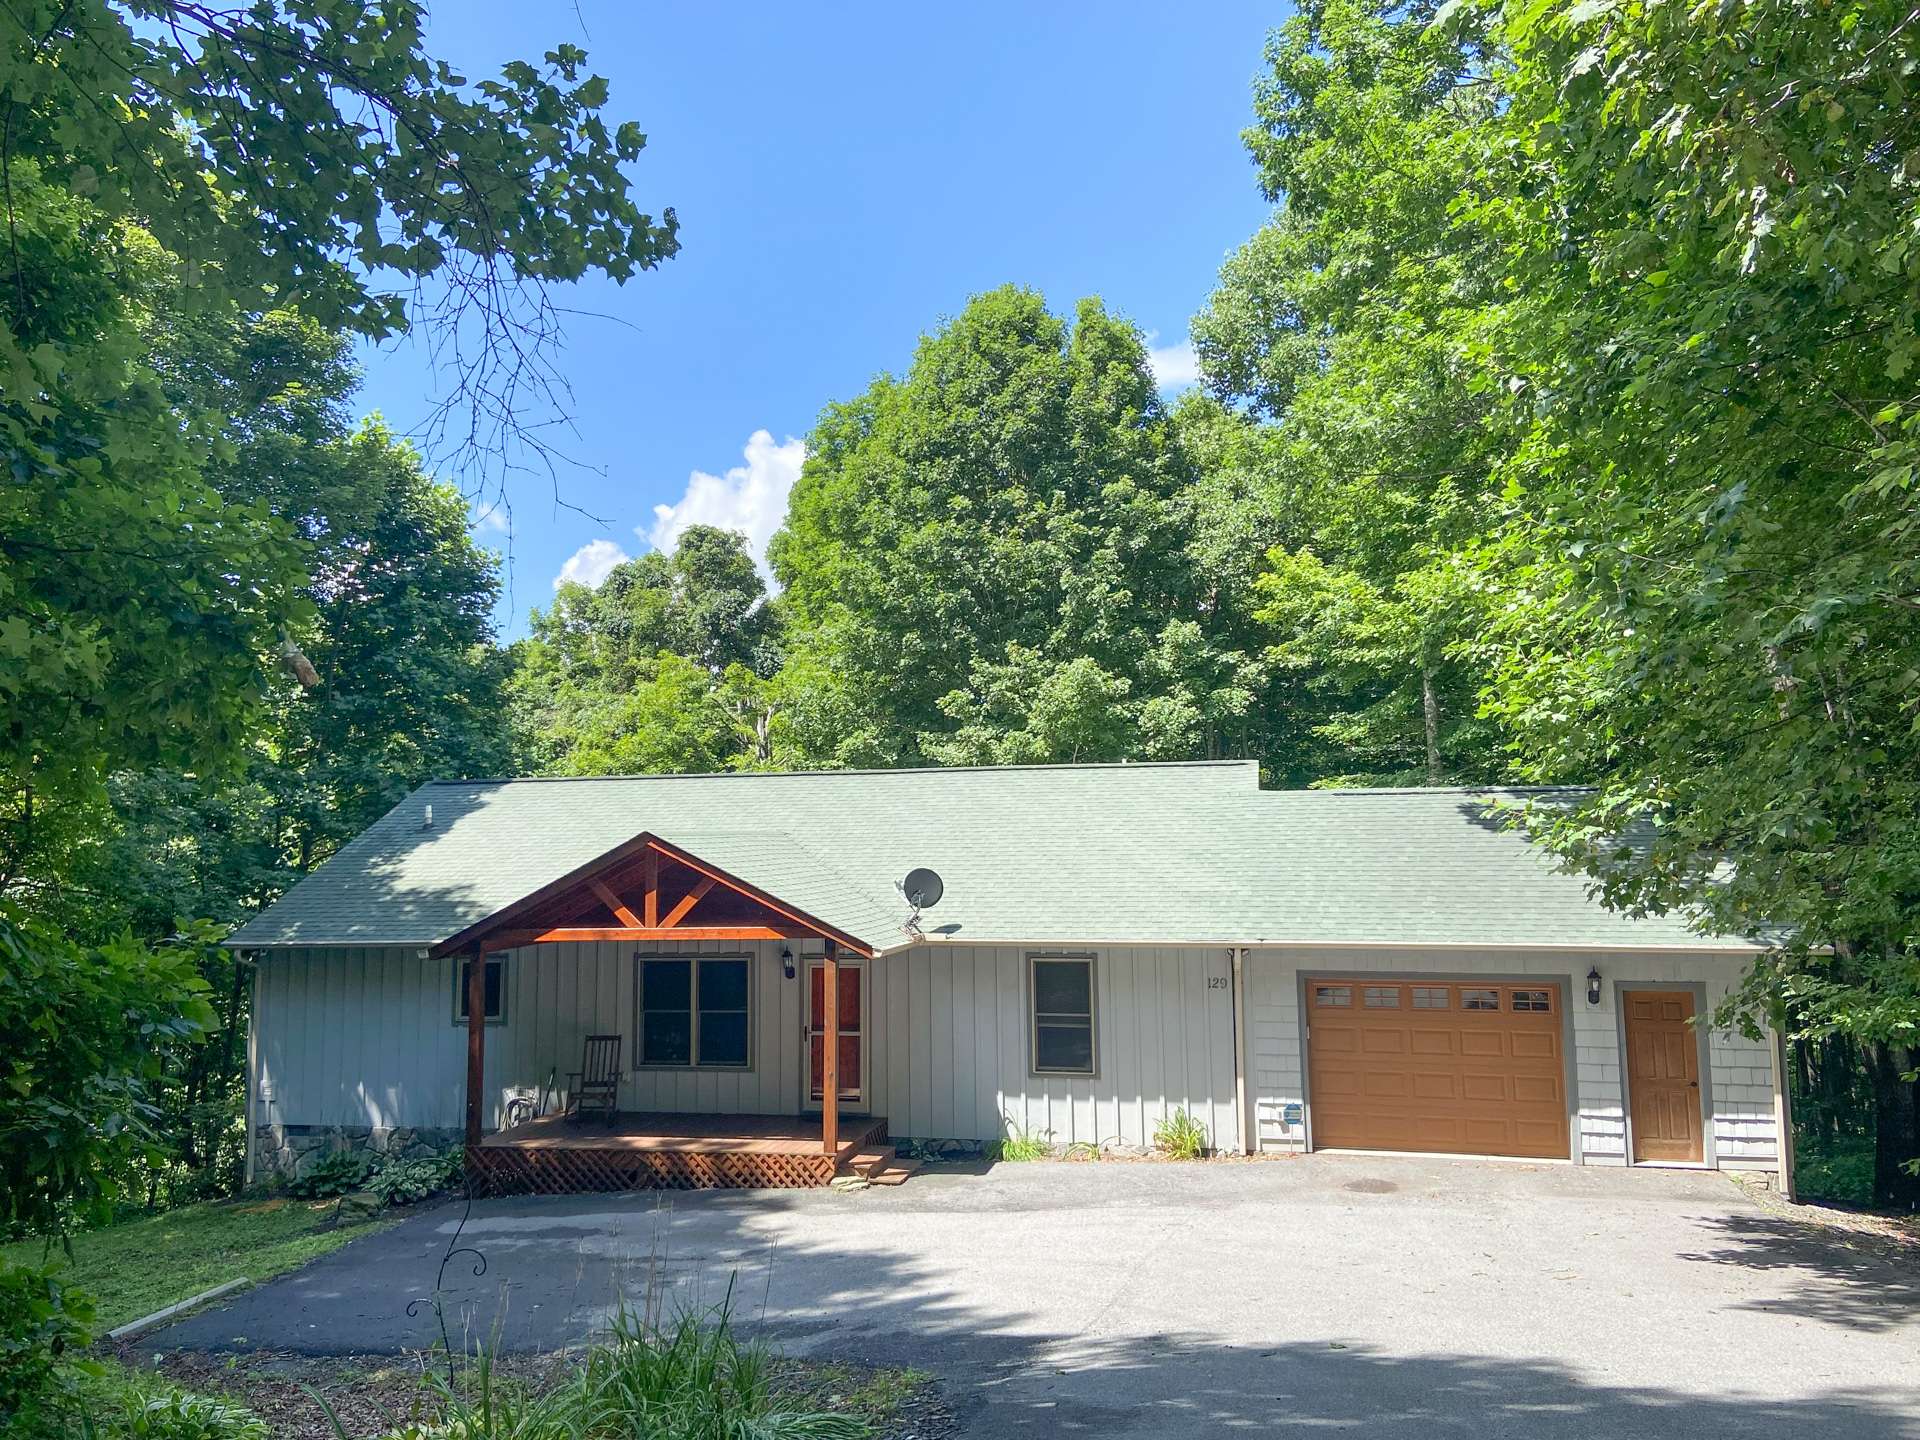 An oversized one car garage provides plenty of space for outdoor toys, equipment, or workshop area/  This sweet  NC Mountain cottage is perfect for first-time home buyers, small family, vacation home retreat, or vacation rental, and only 13 minutes to West Jefferson and 37 minutes from Boone, NC.  Call for information on listing P112.